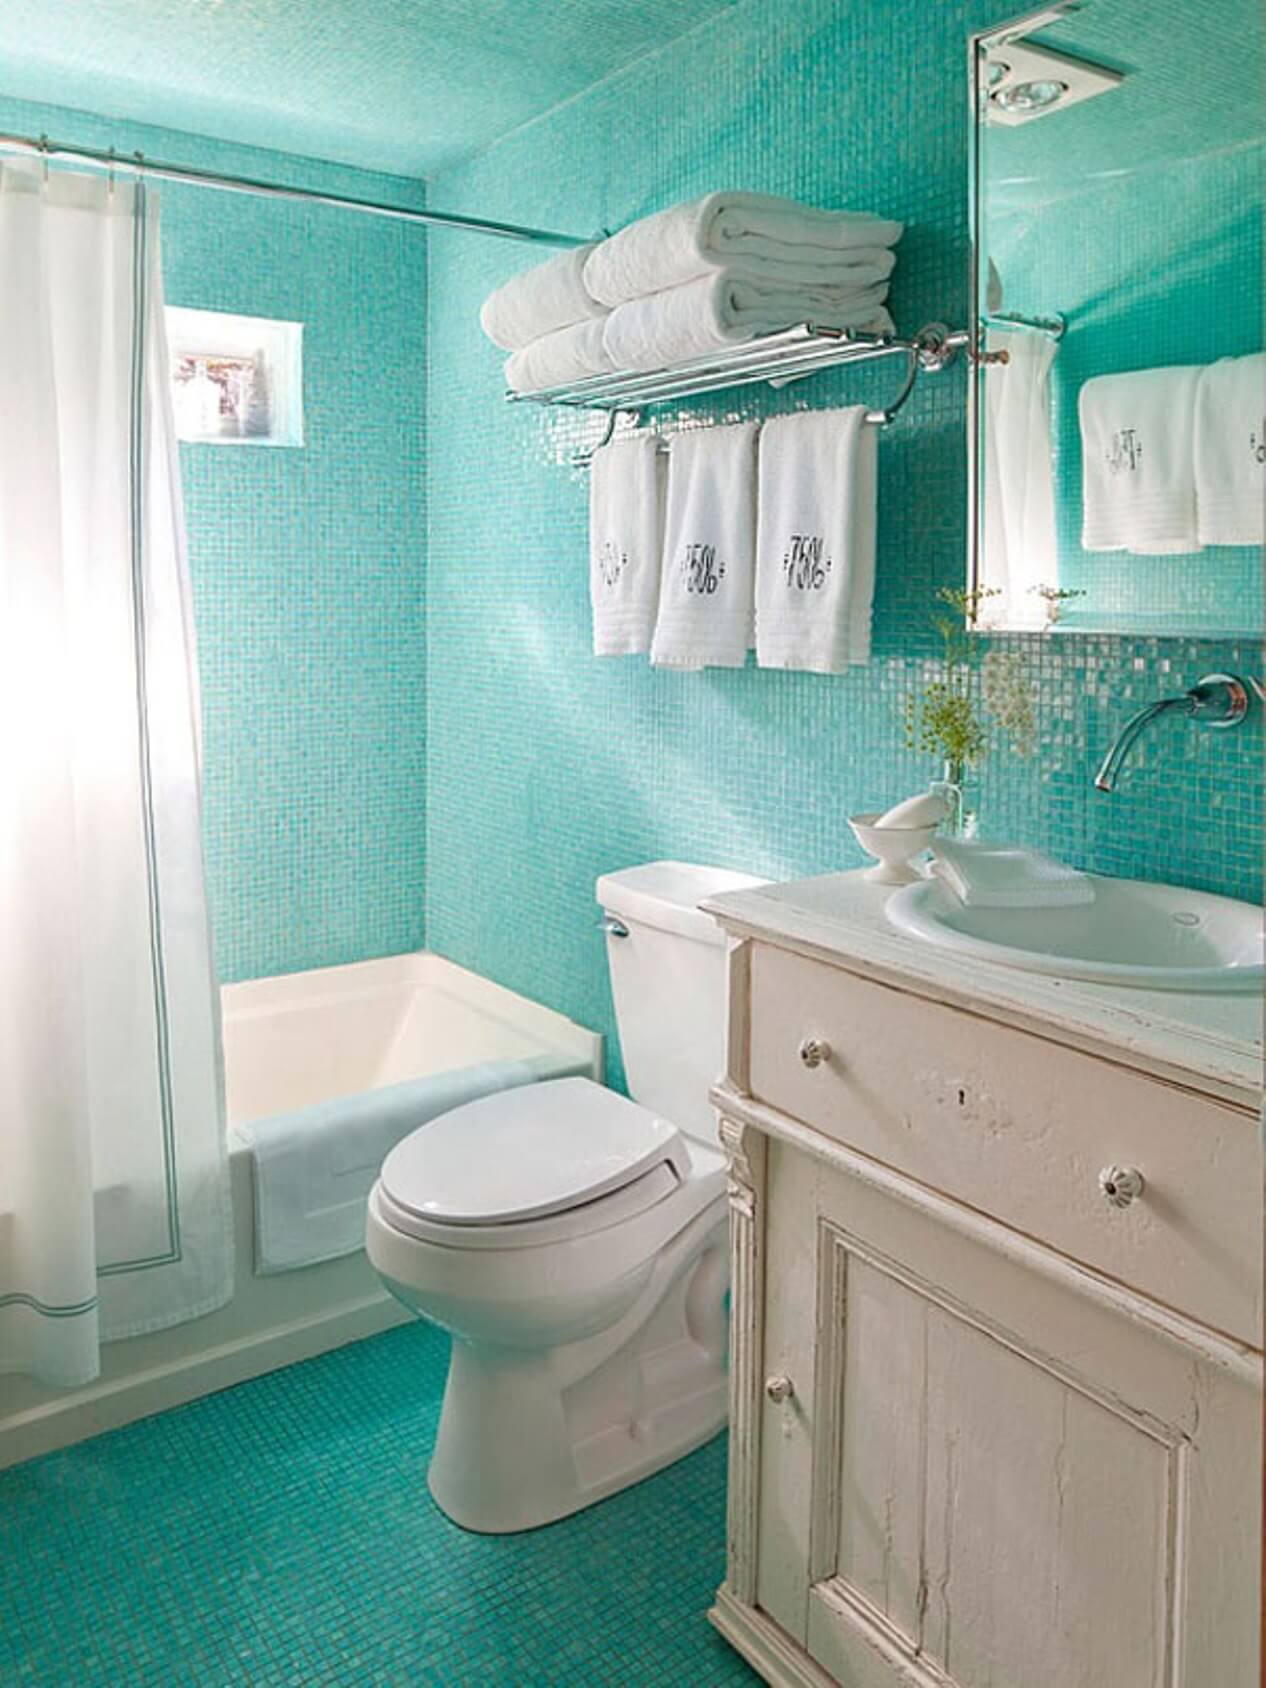 Shabby Chic Bathroom Covered with Turquoise Tiles